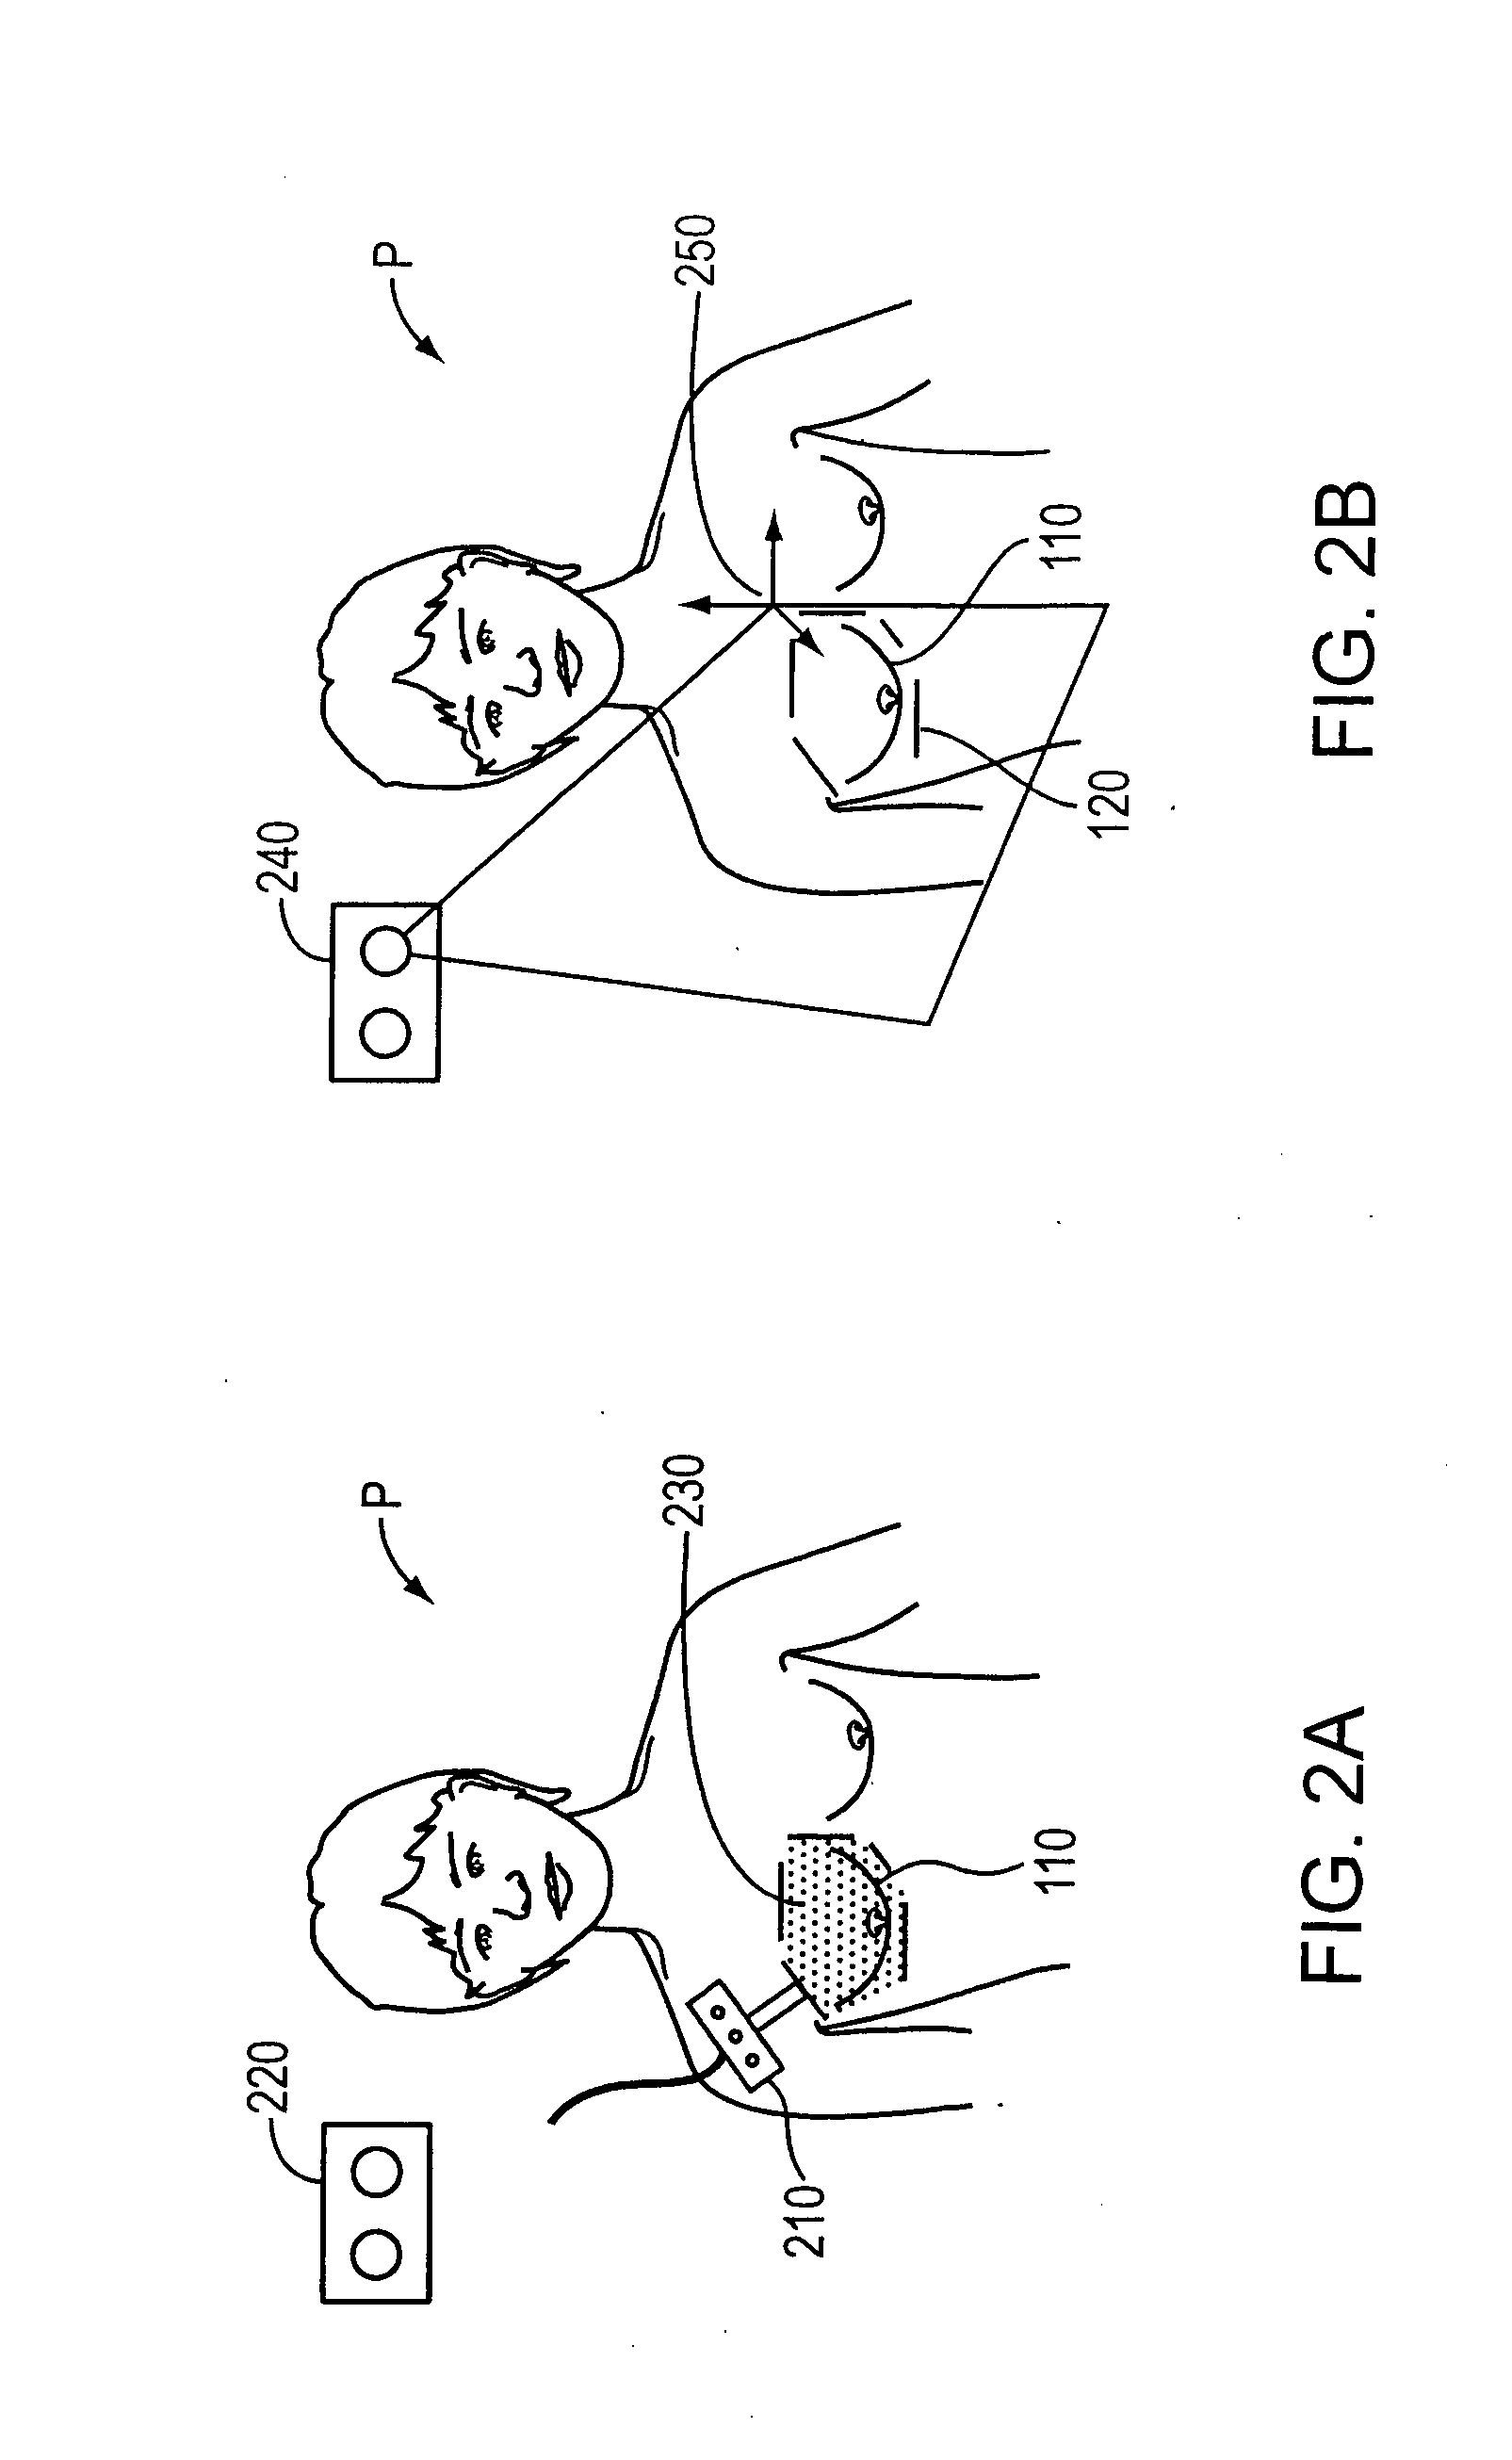 System and method for patient setup for radiotherapy treatment